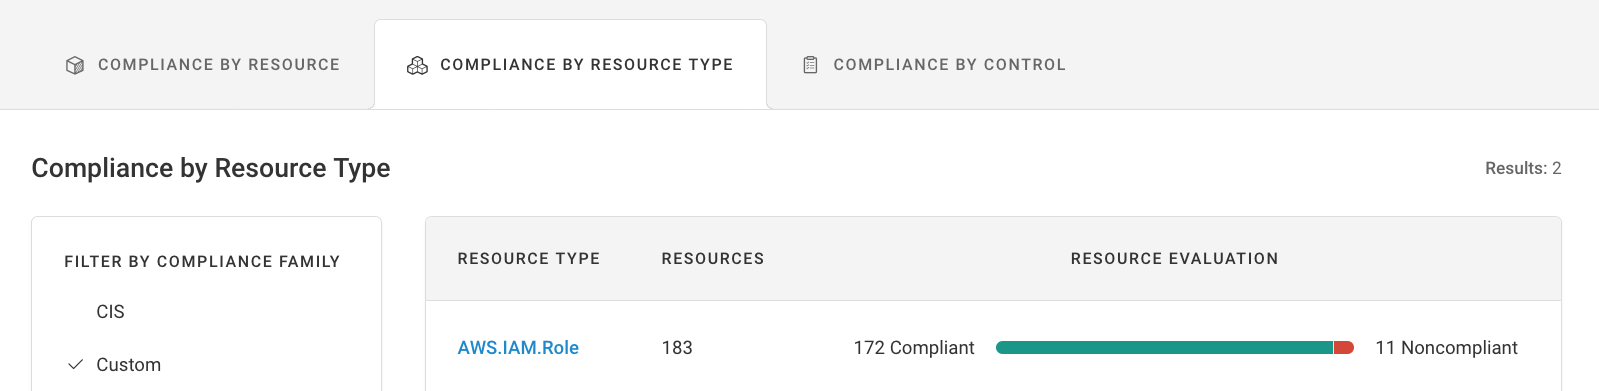 _images/Compliance_by_ResourceType.png